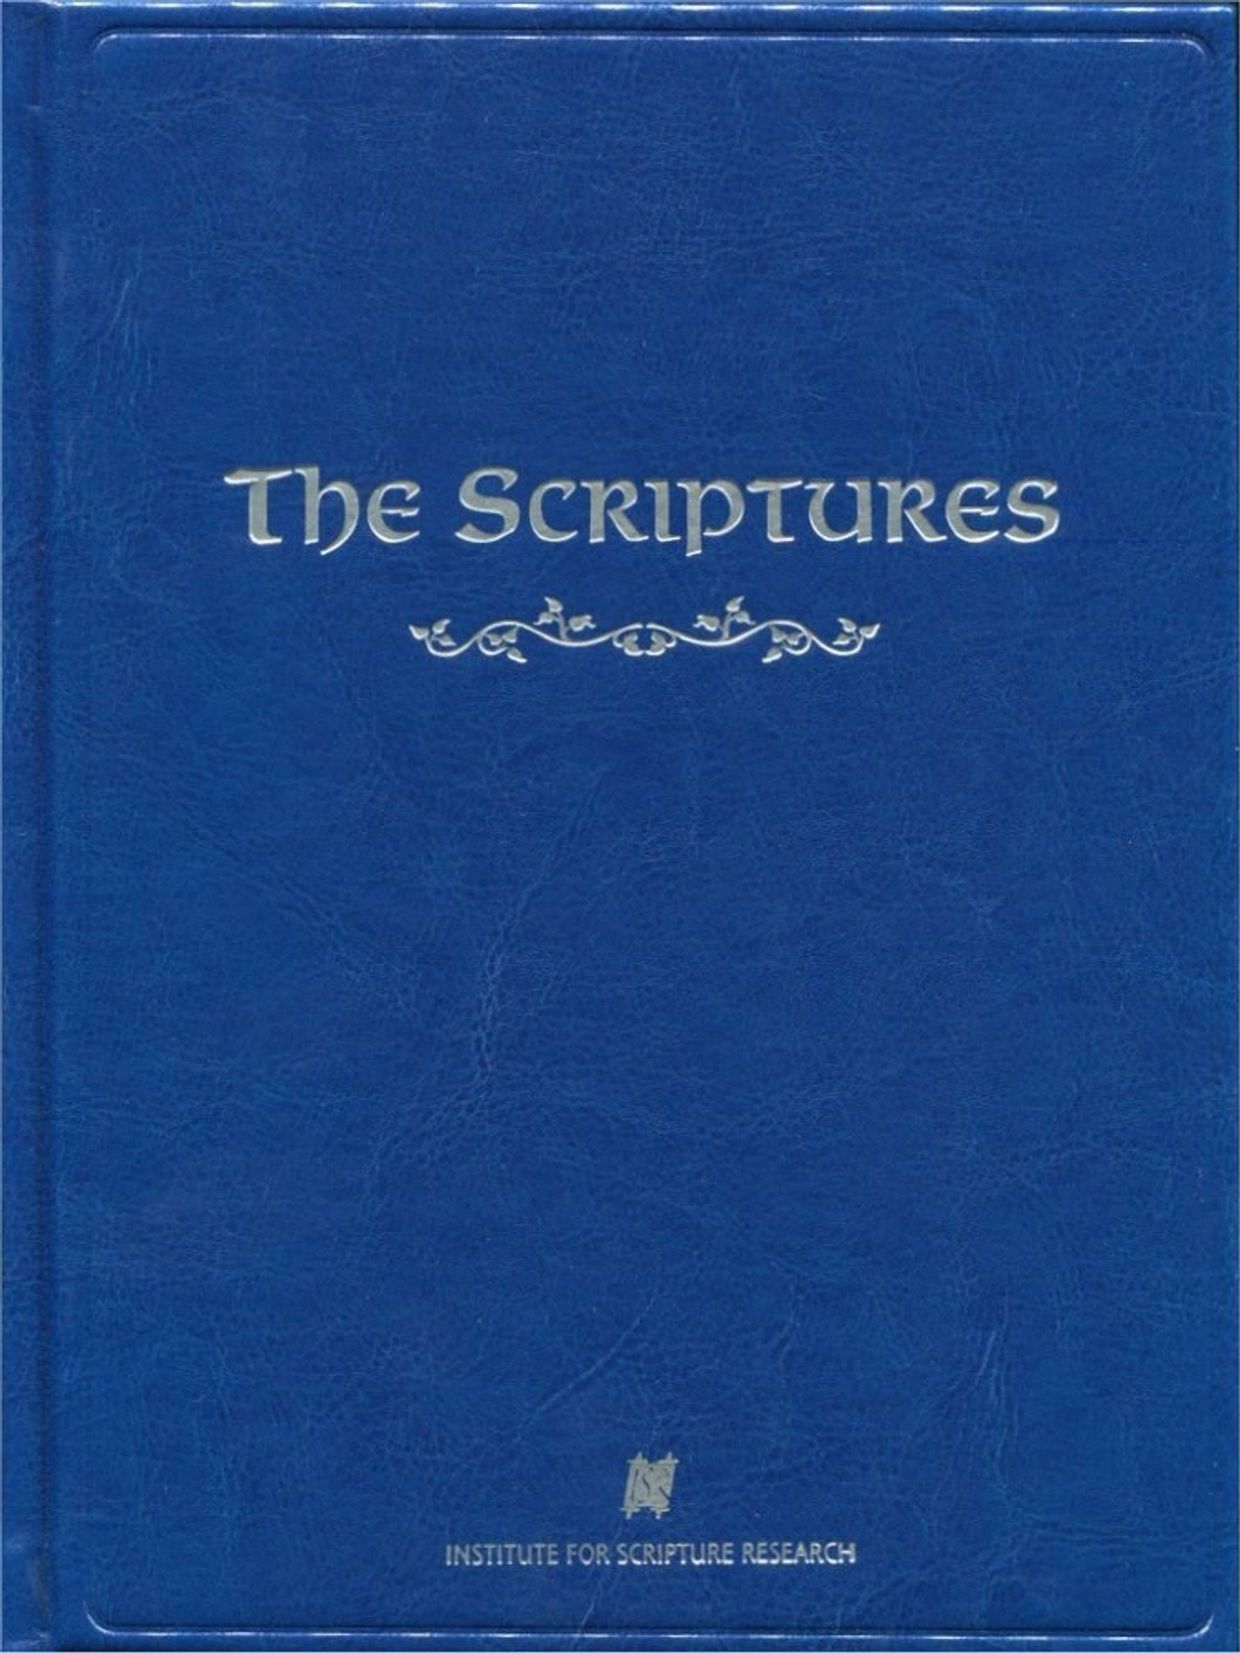 Image of the real names Bible "The Scriptures" by ISR (Institute of Scripture Research)